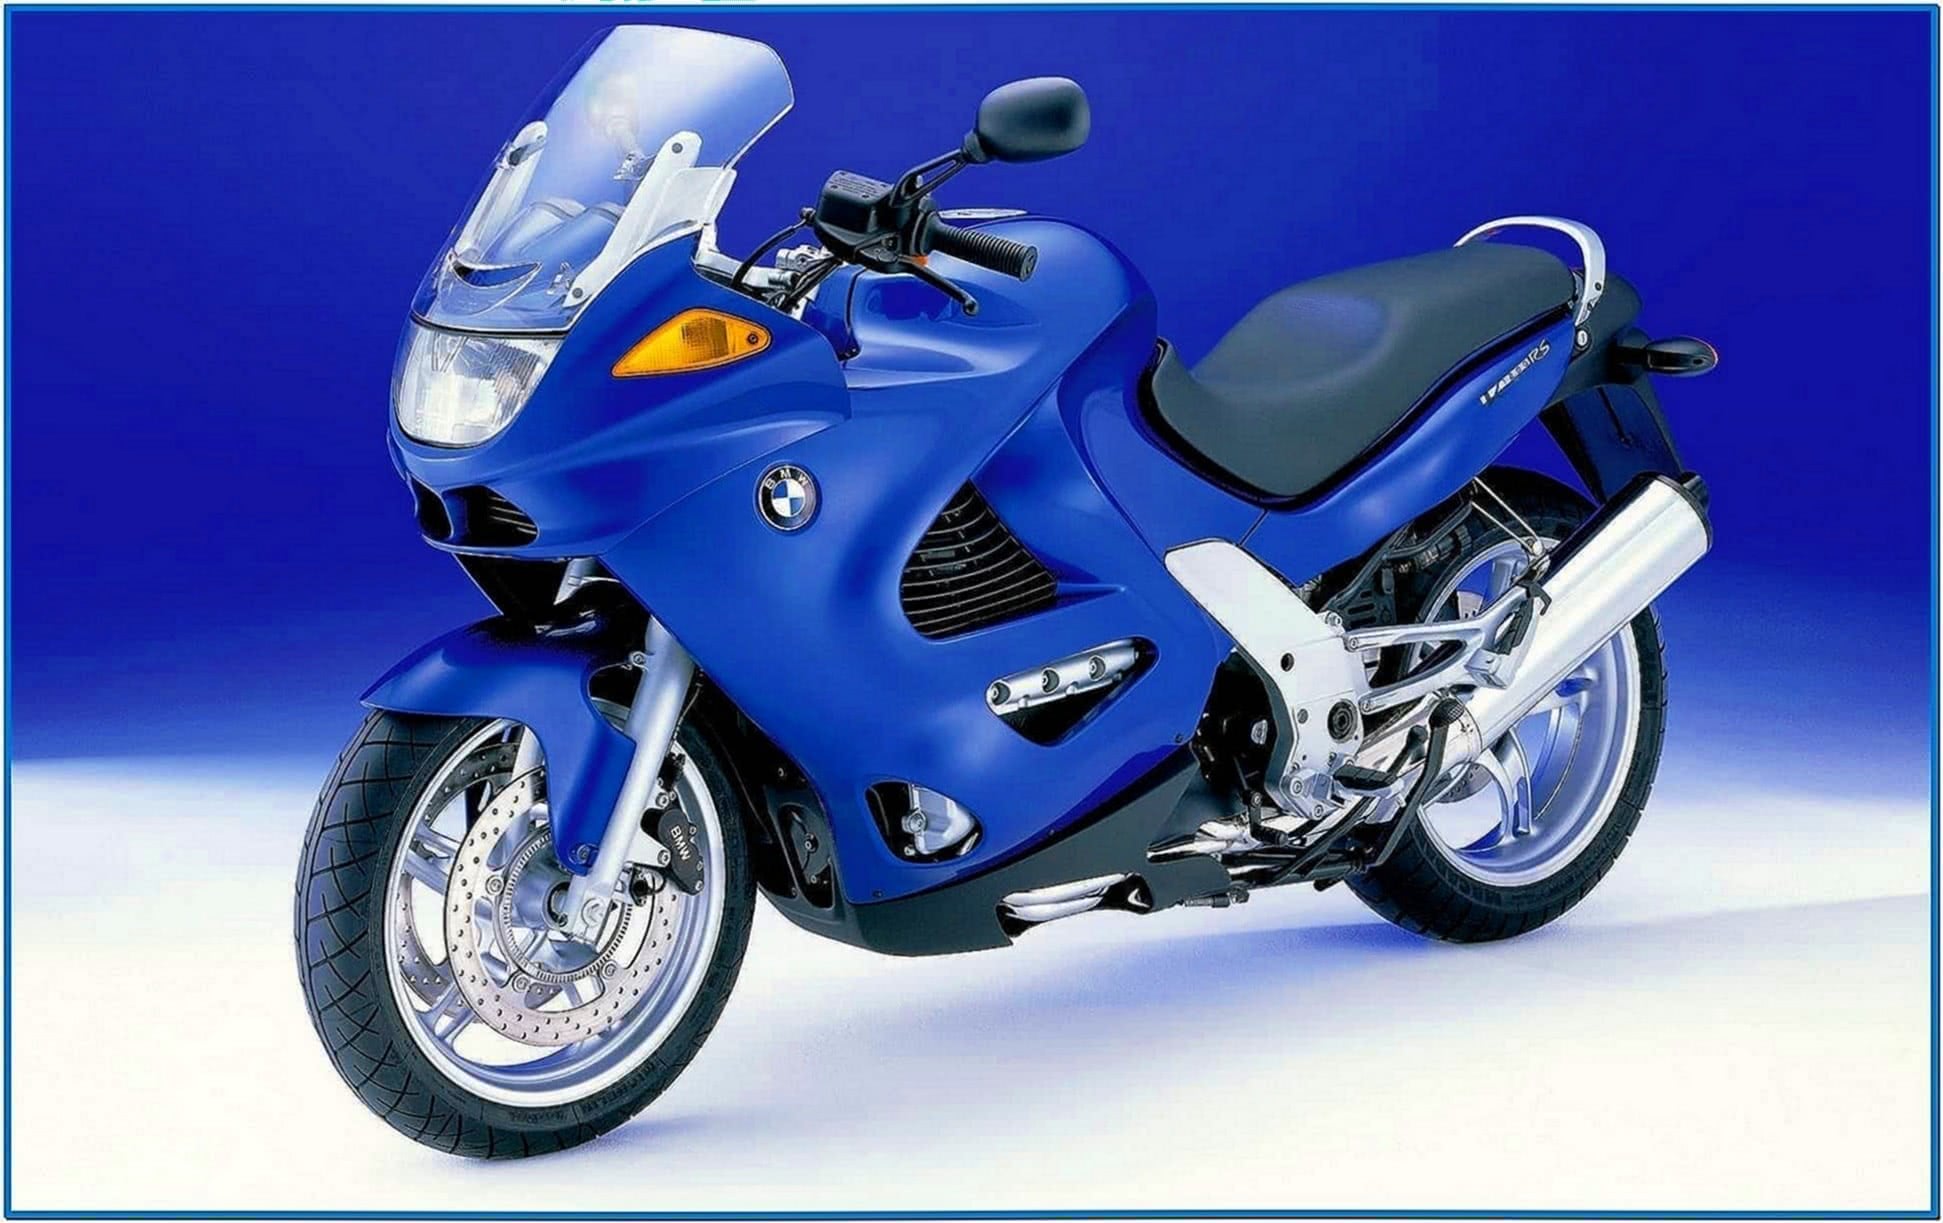 Bmw motorcycle screensaver for windows 7 #7